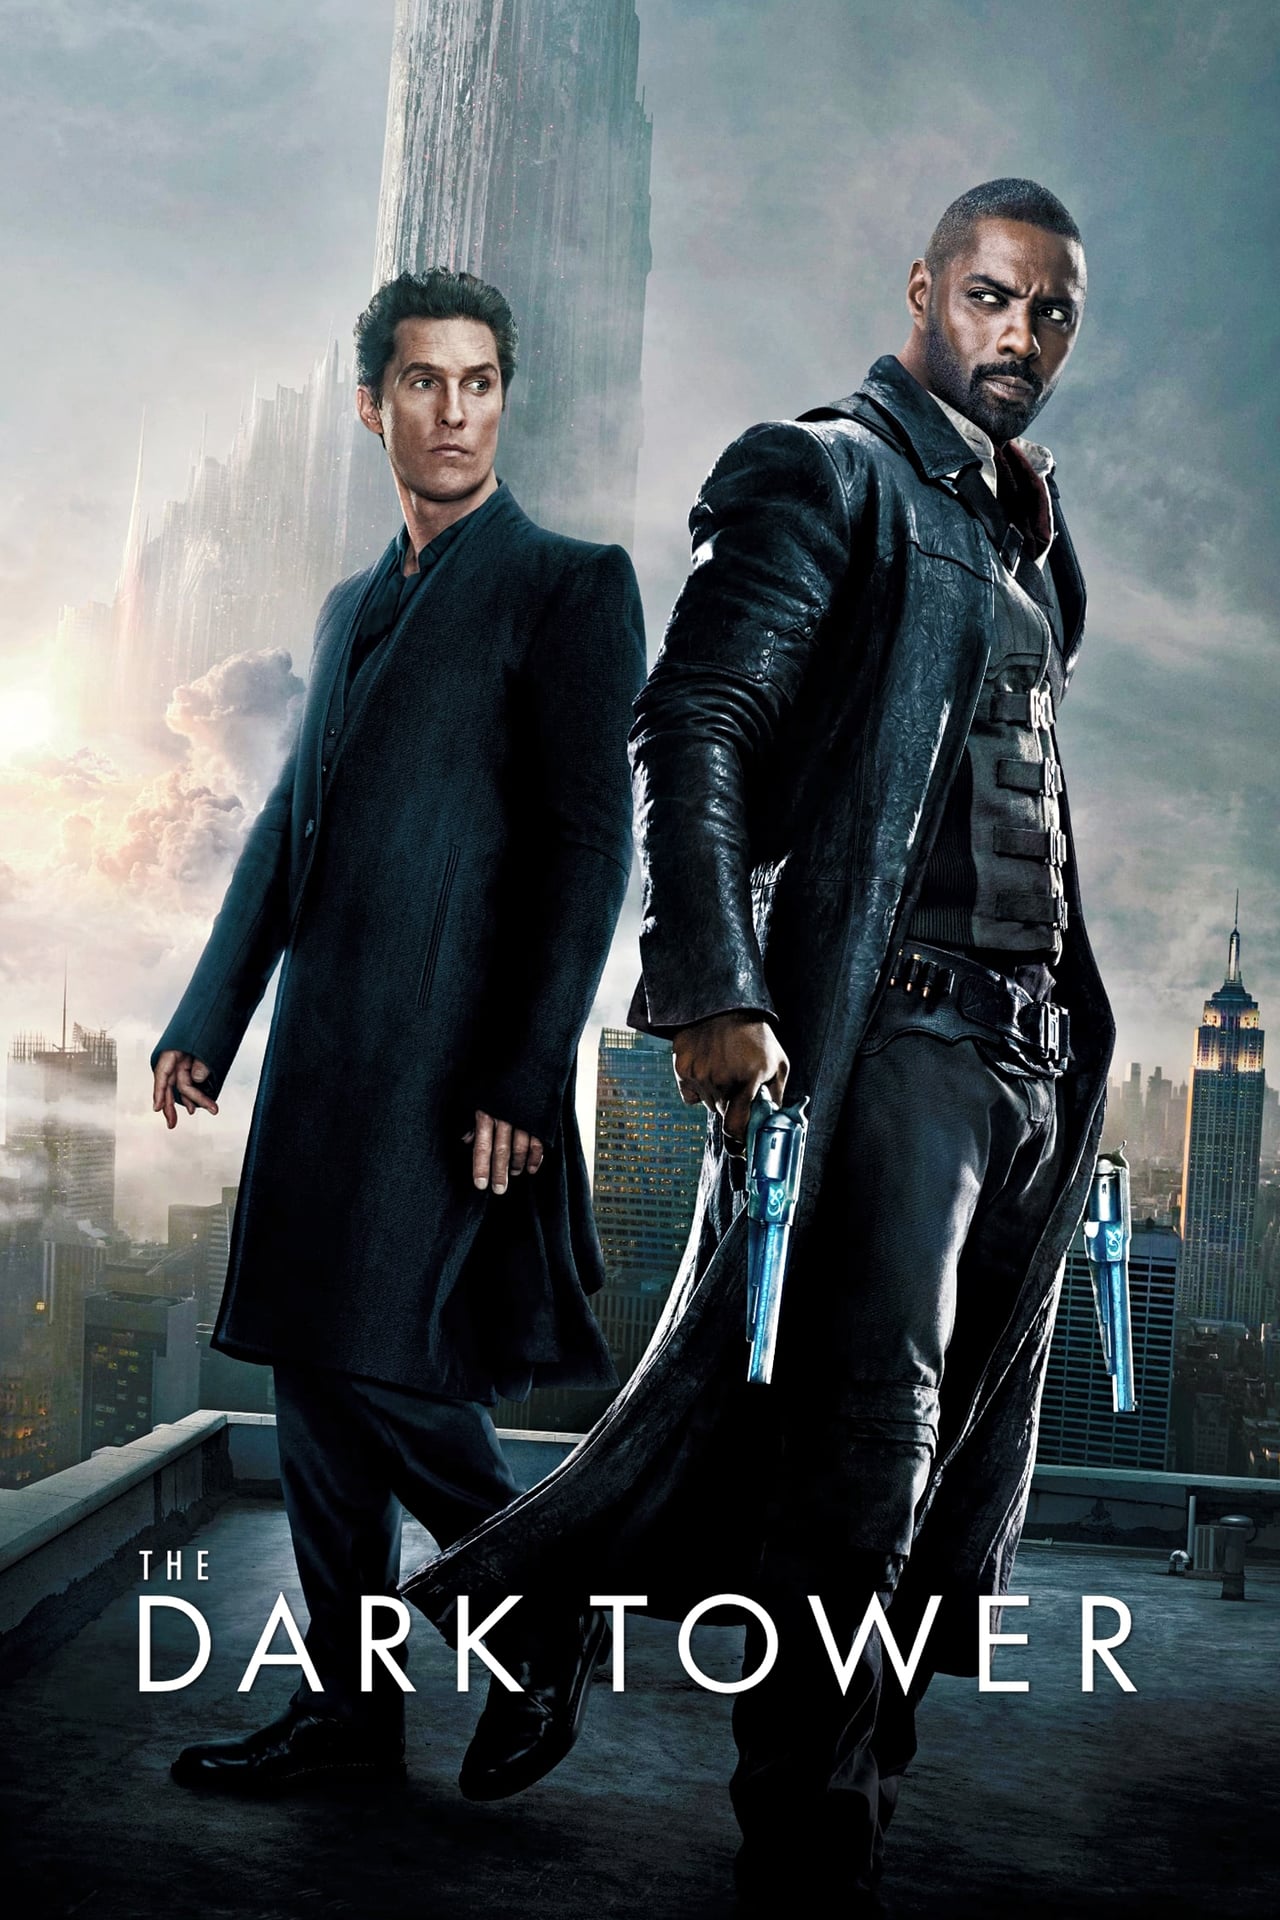 The Dark Tower download the new for windows